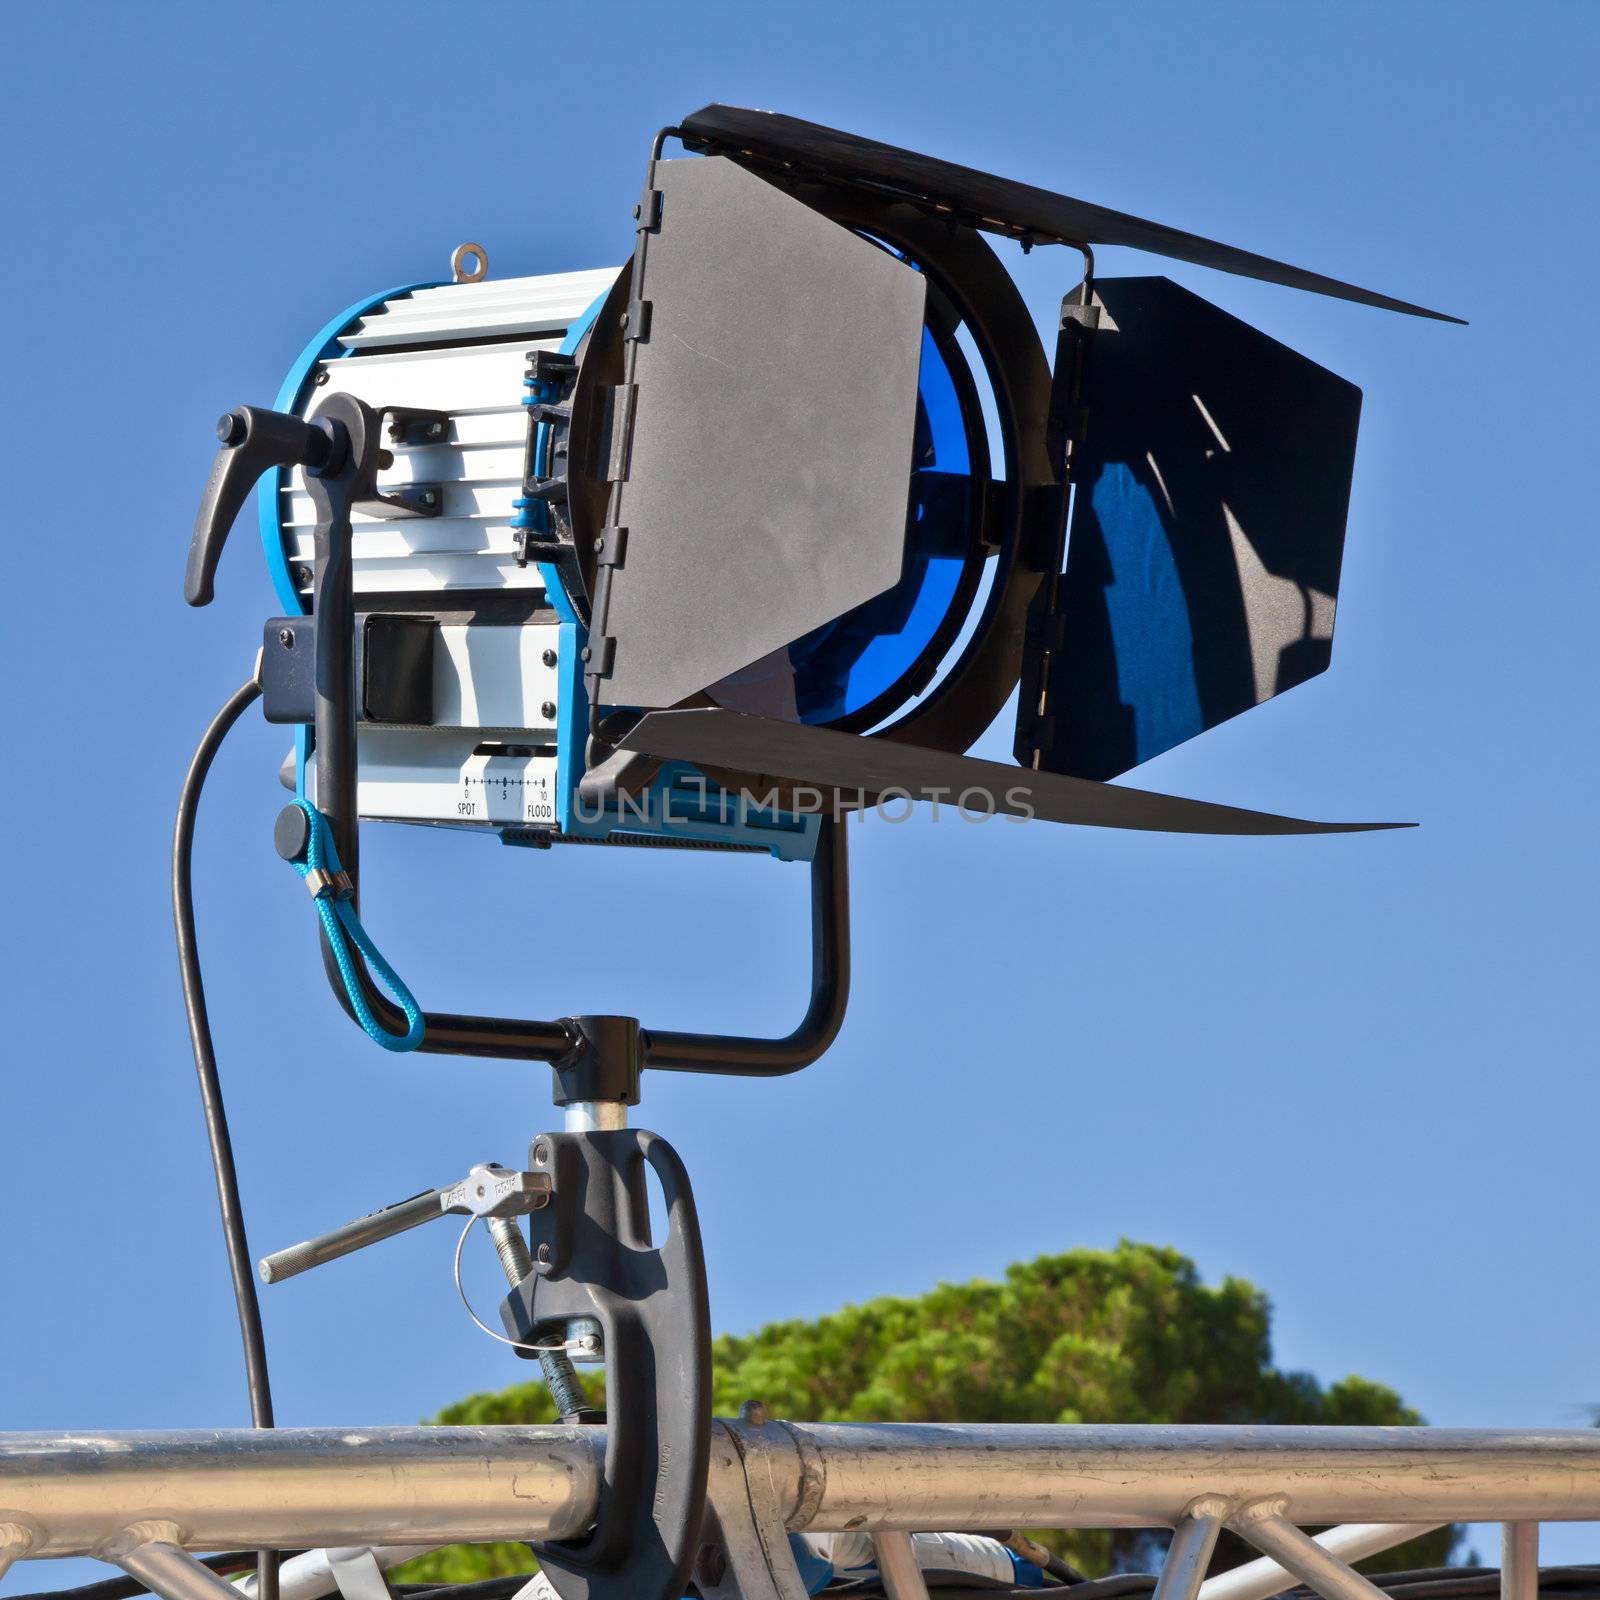 Reflector in an outdoor theater with blue sky background